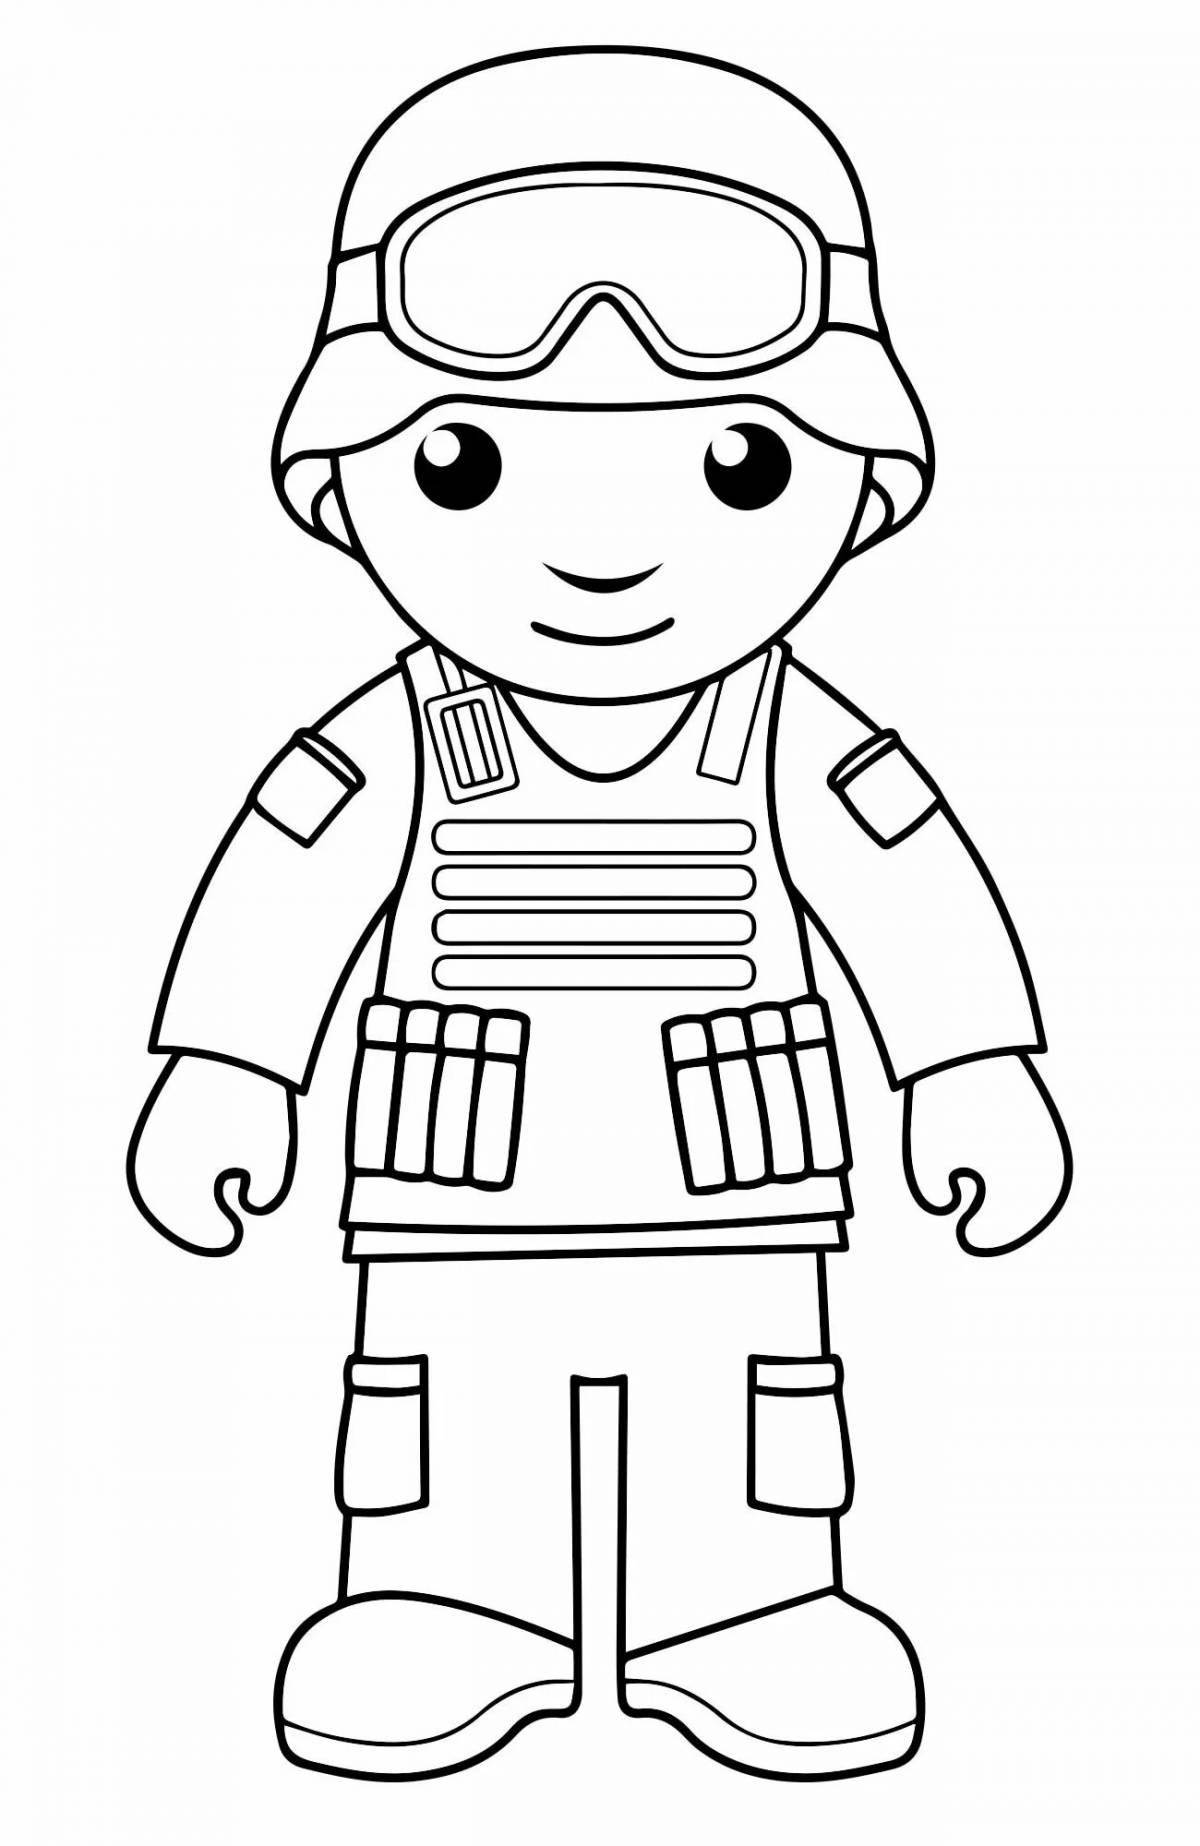 A fun paratrooper coloring book for kids